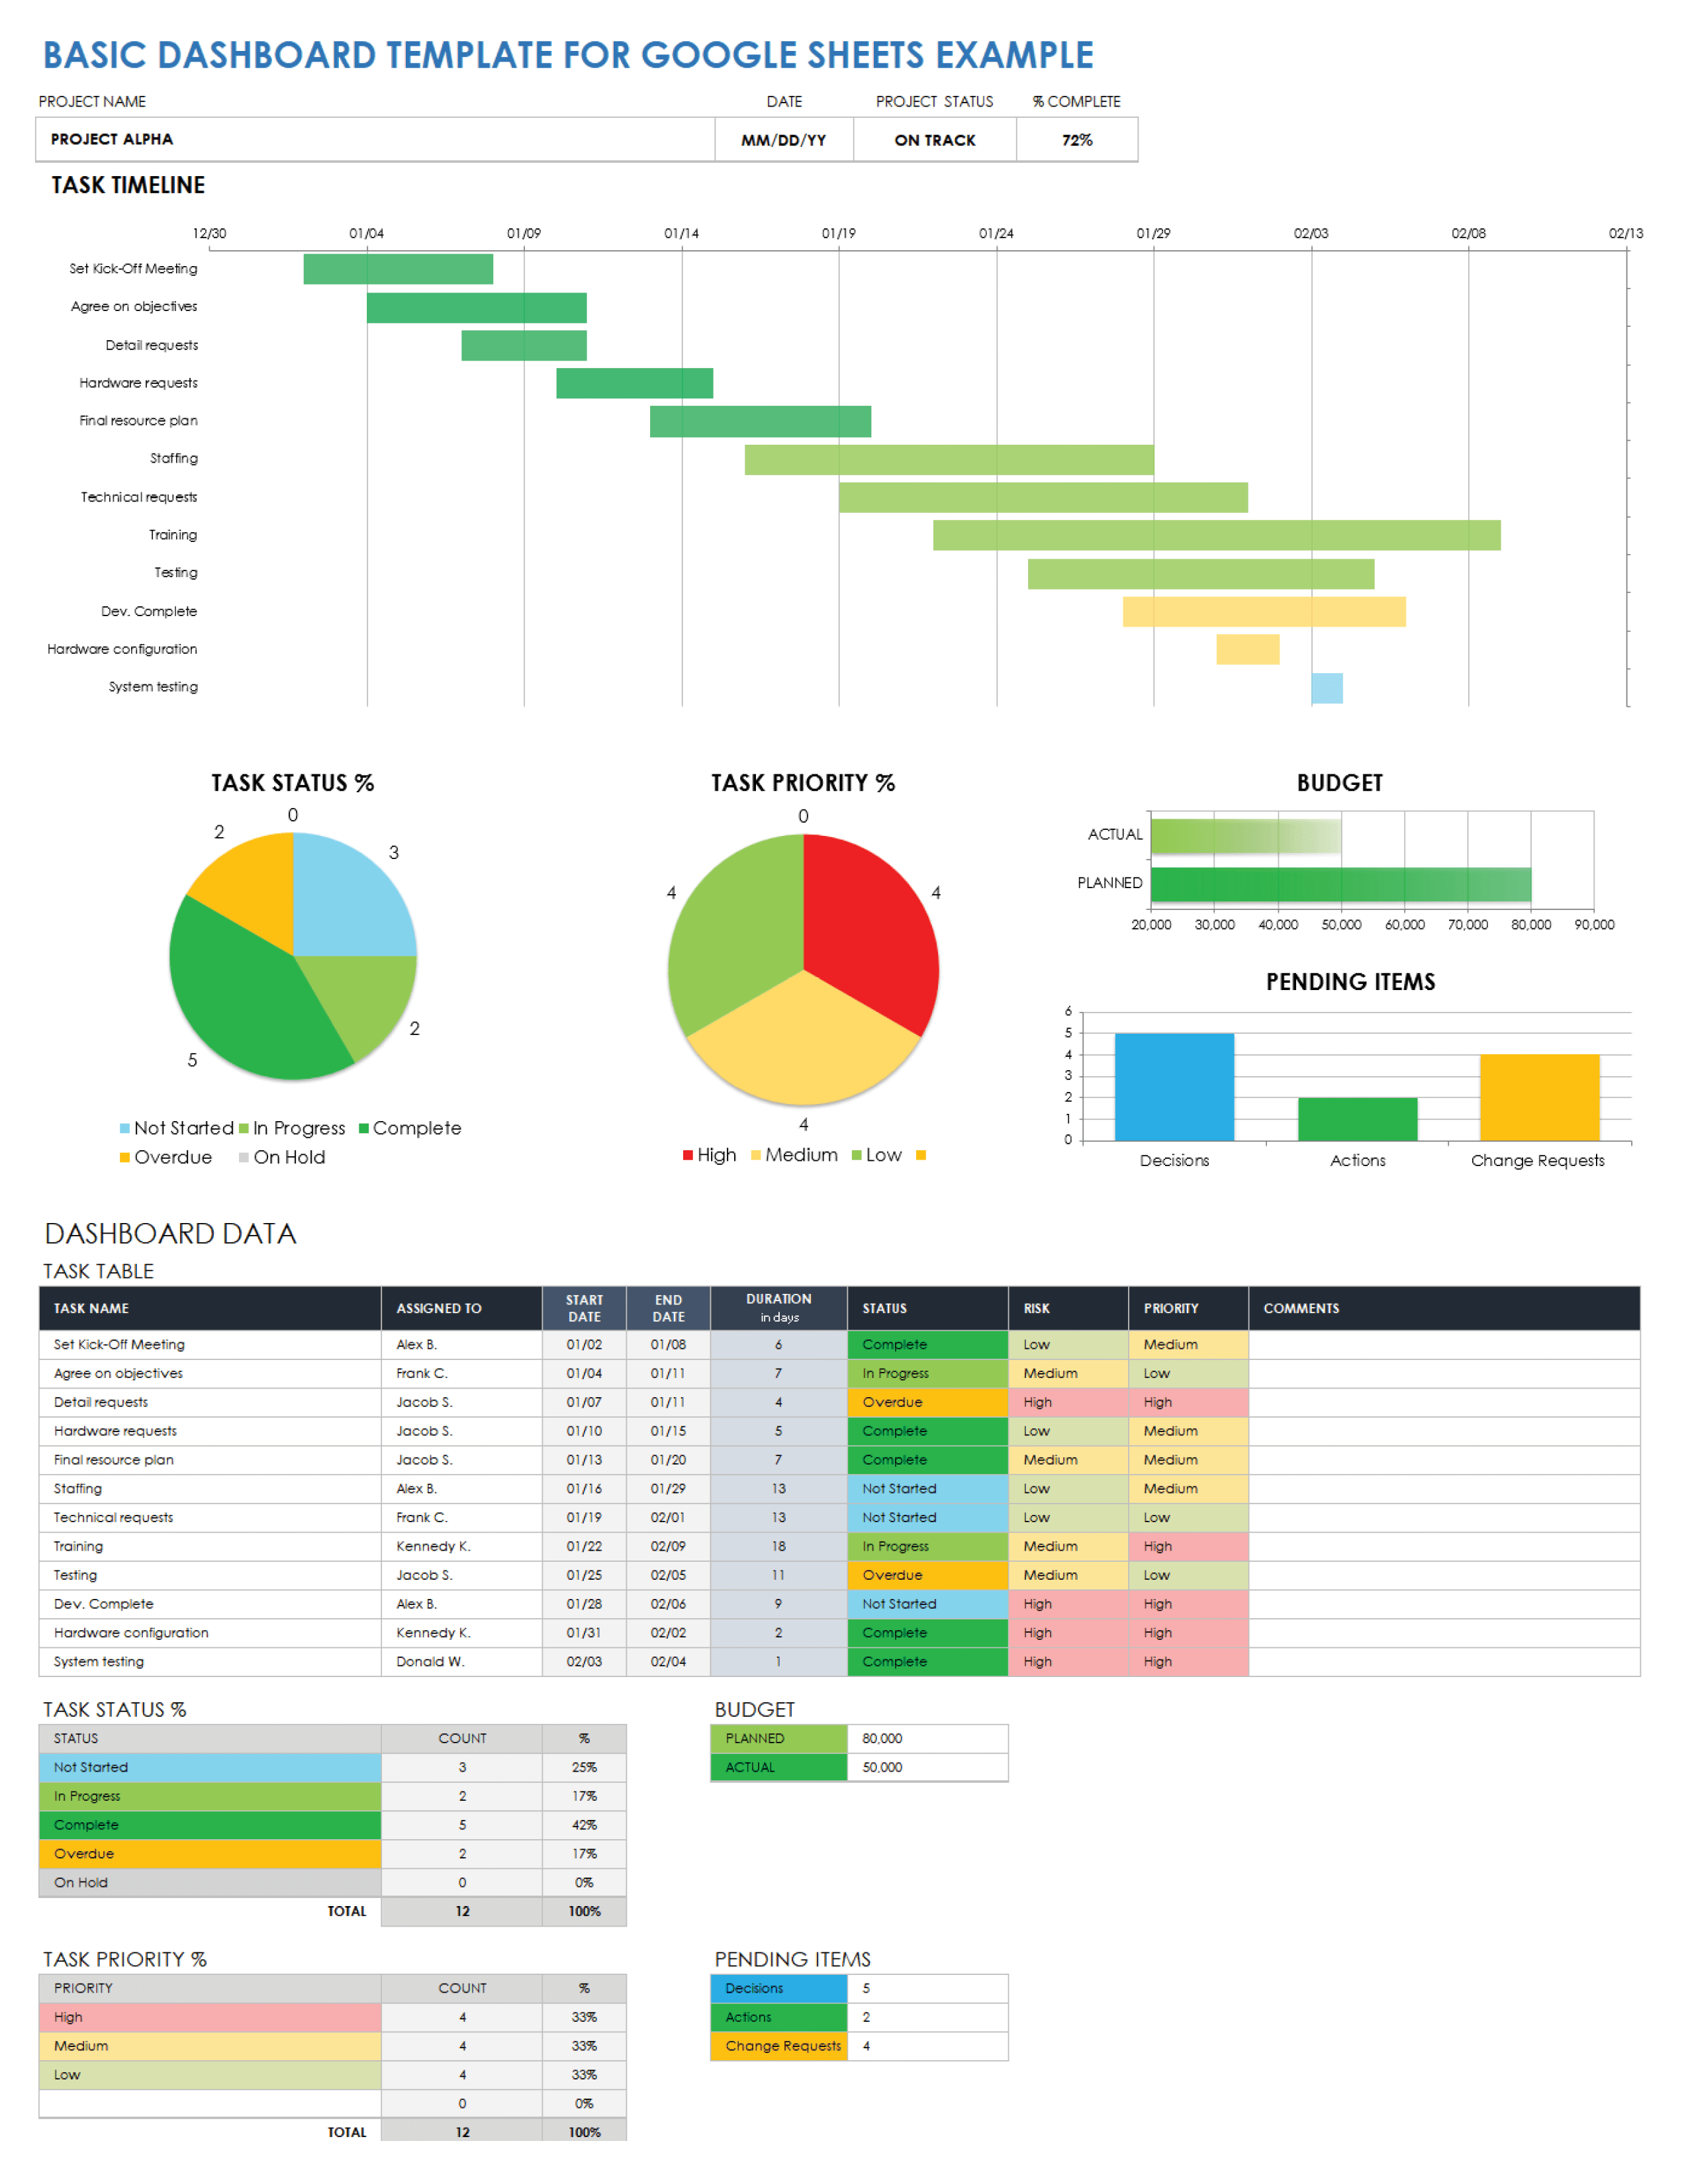 Basic Dashboard Template Example